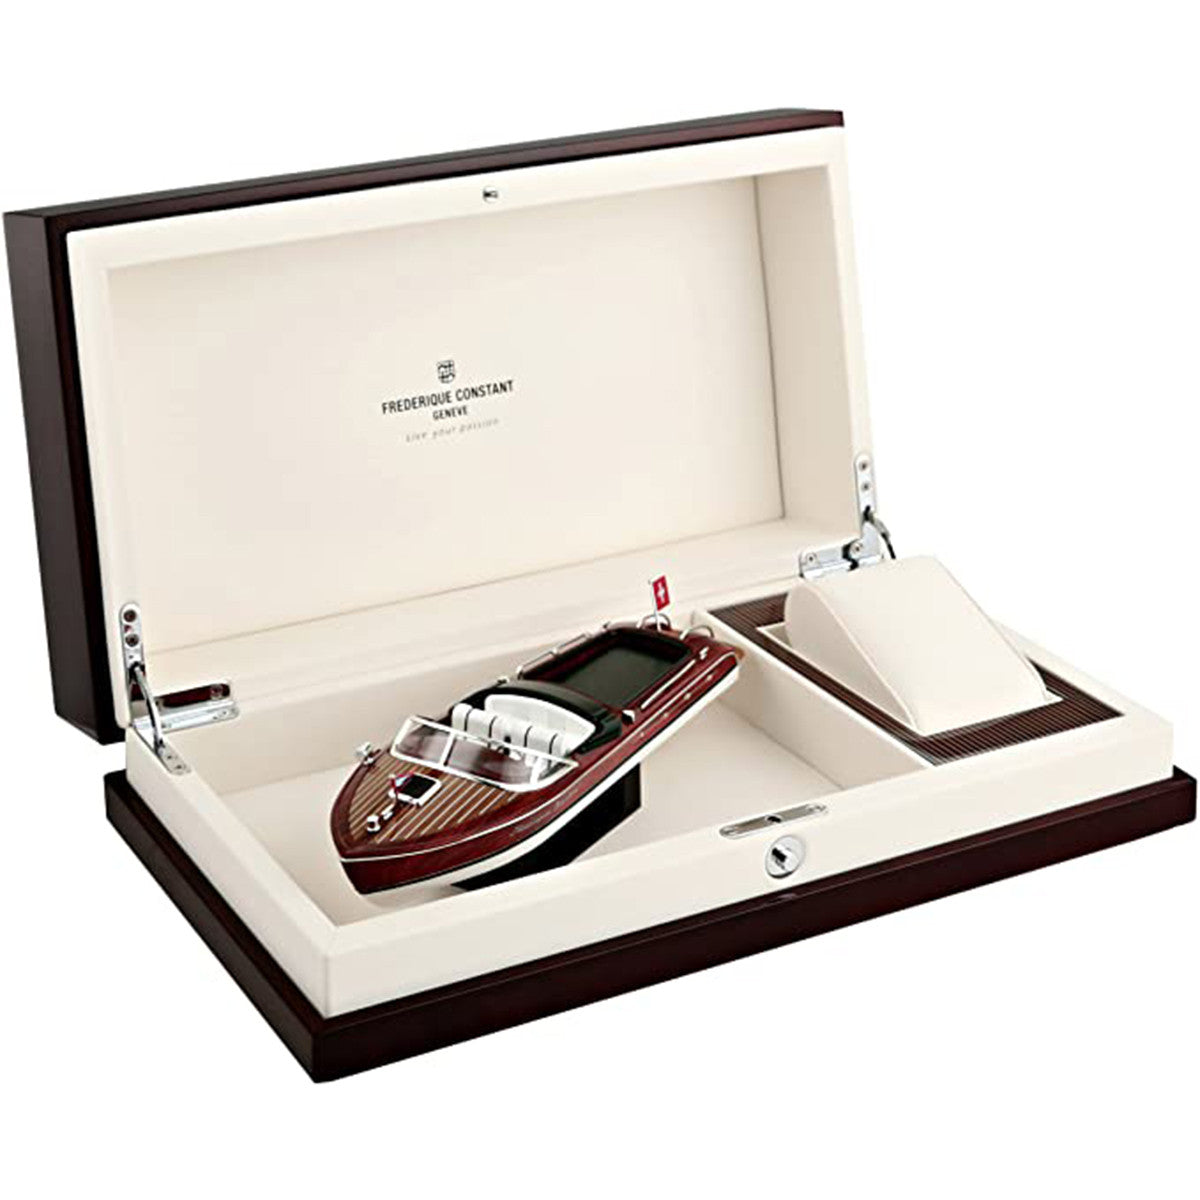 Frederique Constant Watch Automatic Runabout Black Limited Edition FC-303RMB5B6